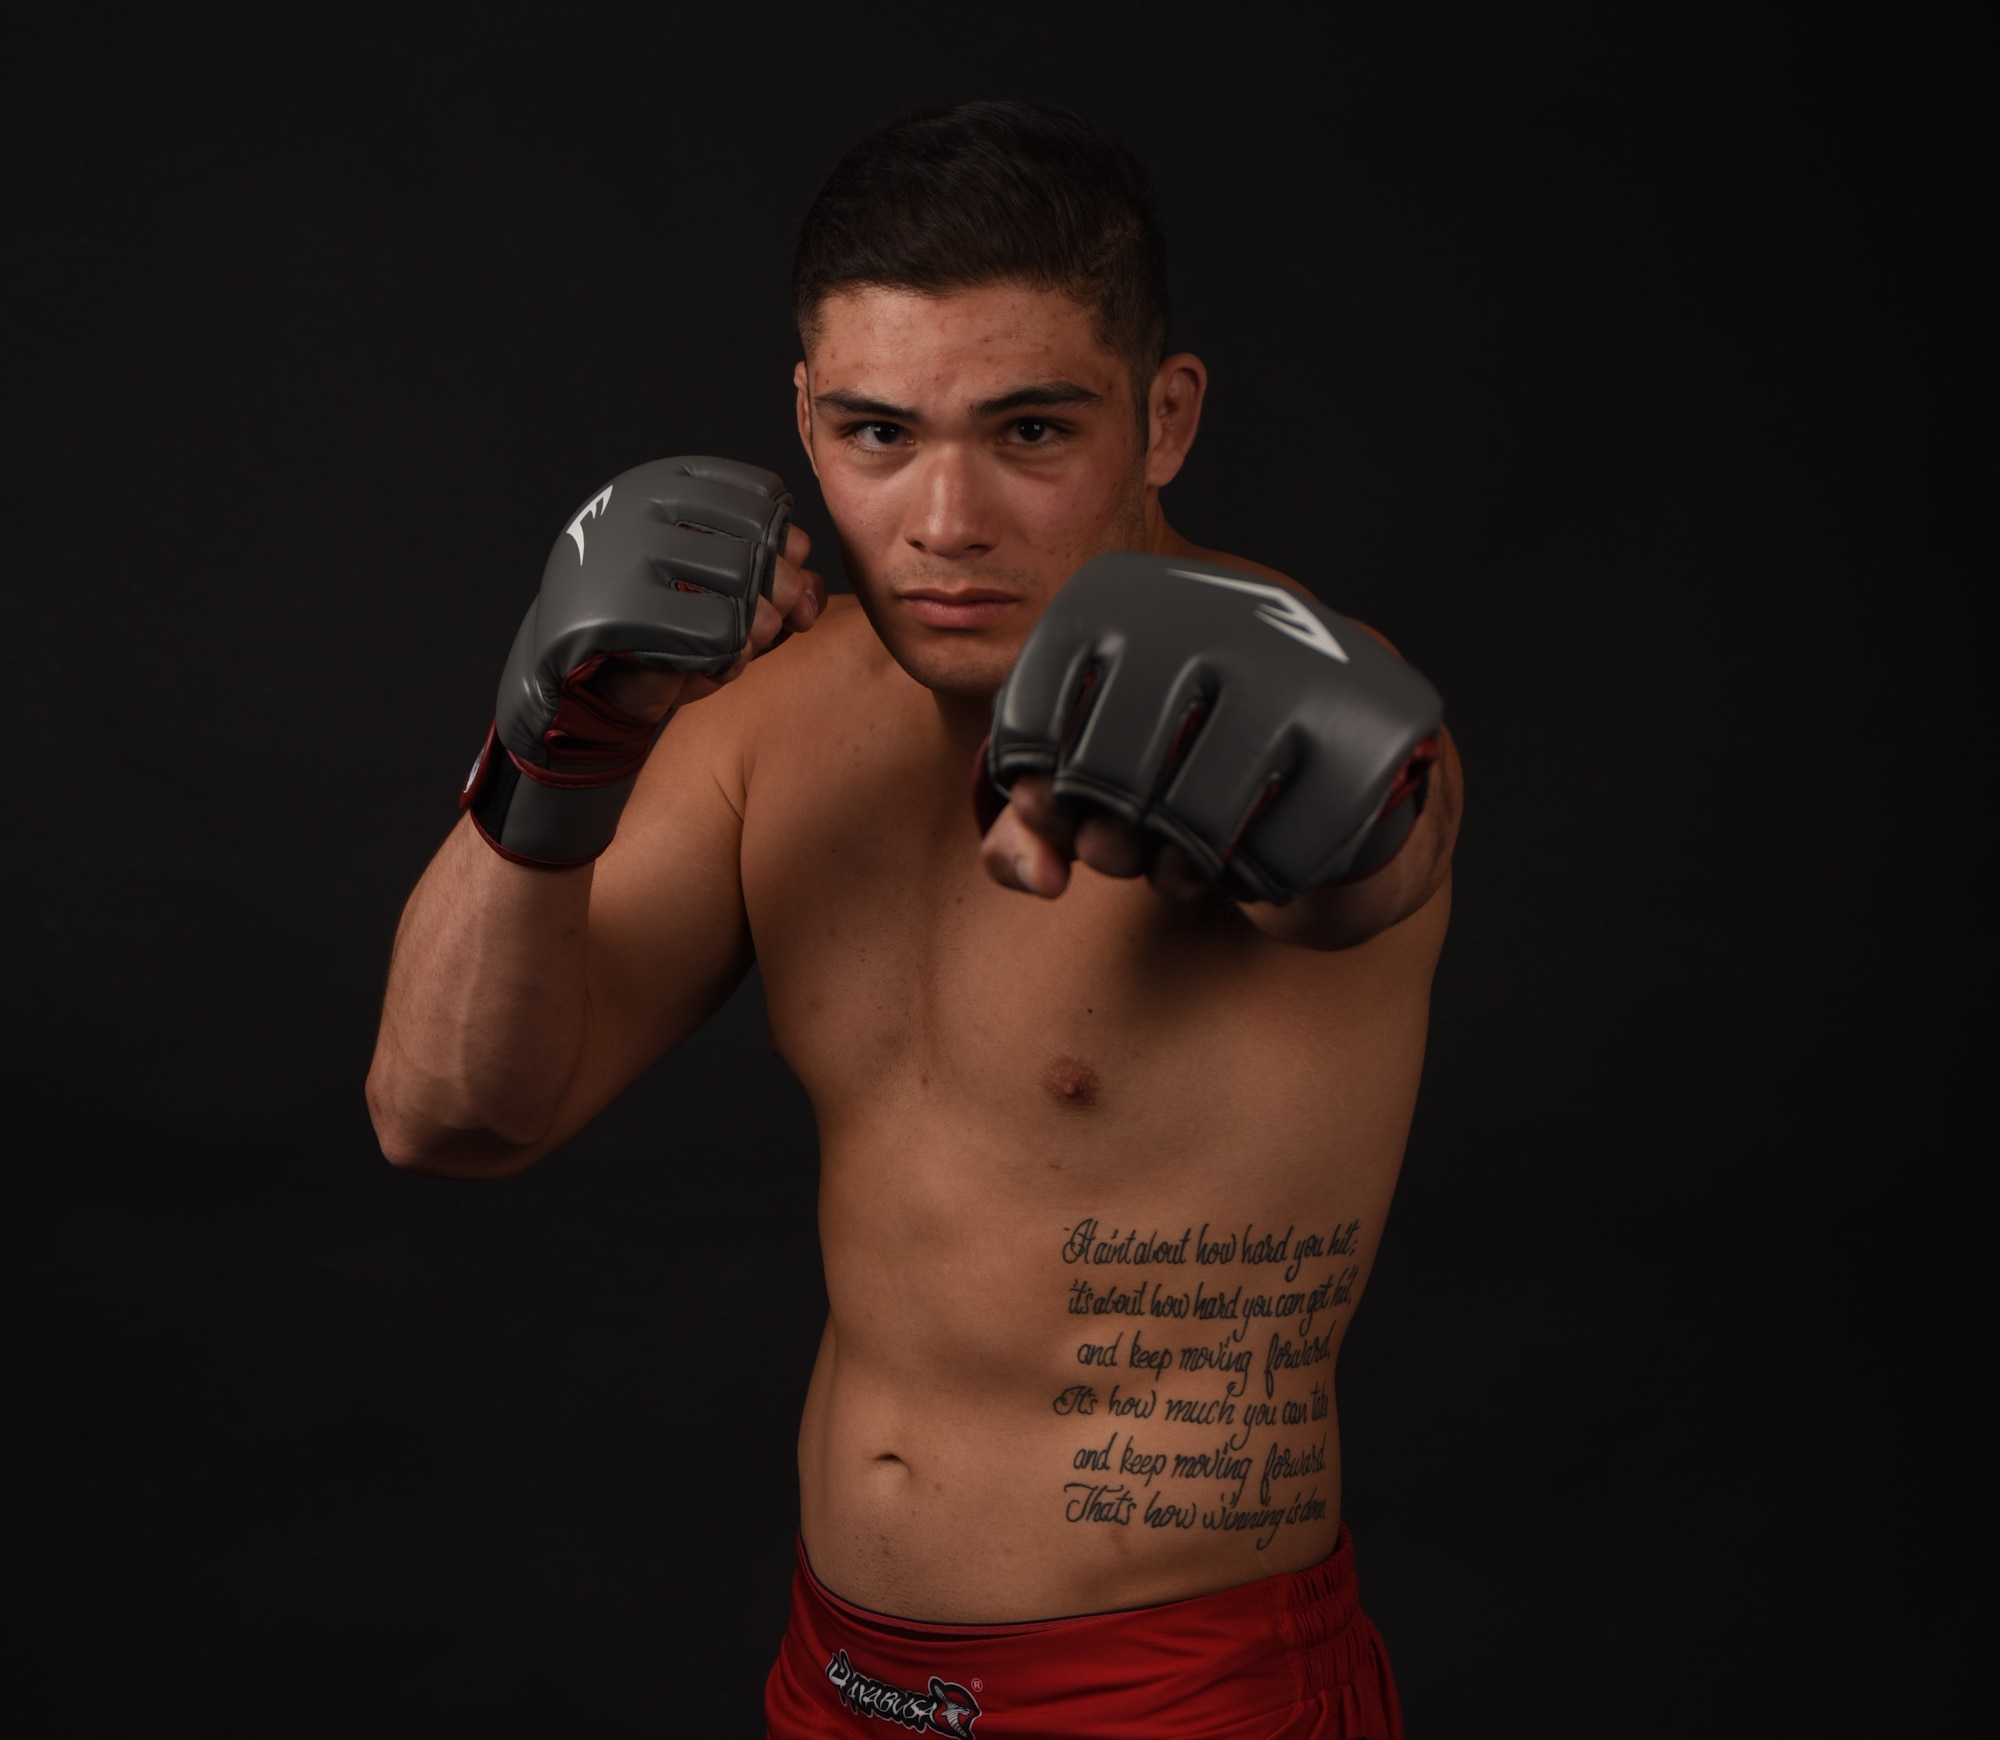 Airman 1st Class Raul Veliz, 90th Missile Security Forces Squadron response force leader, poses for a photo at F.E. Warren Air Force Base, Wyo., May 17, 2017. Veliz fights in the 185 lb. weight class for mixed martial arts. (U.S. Air Force photo by Airman 1st Class Breanna Carter)